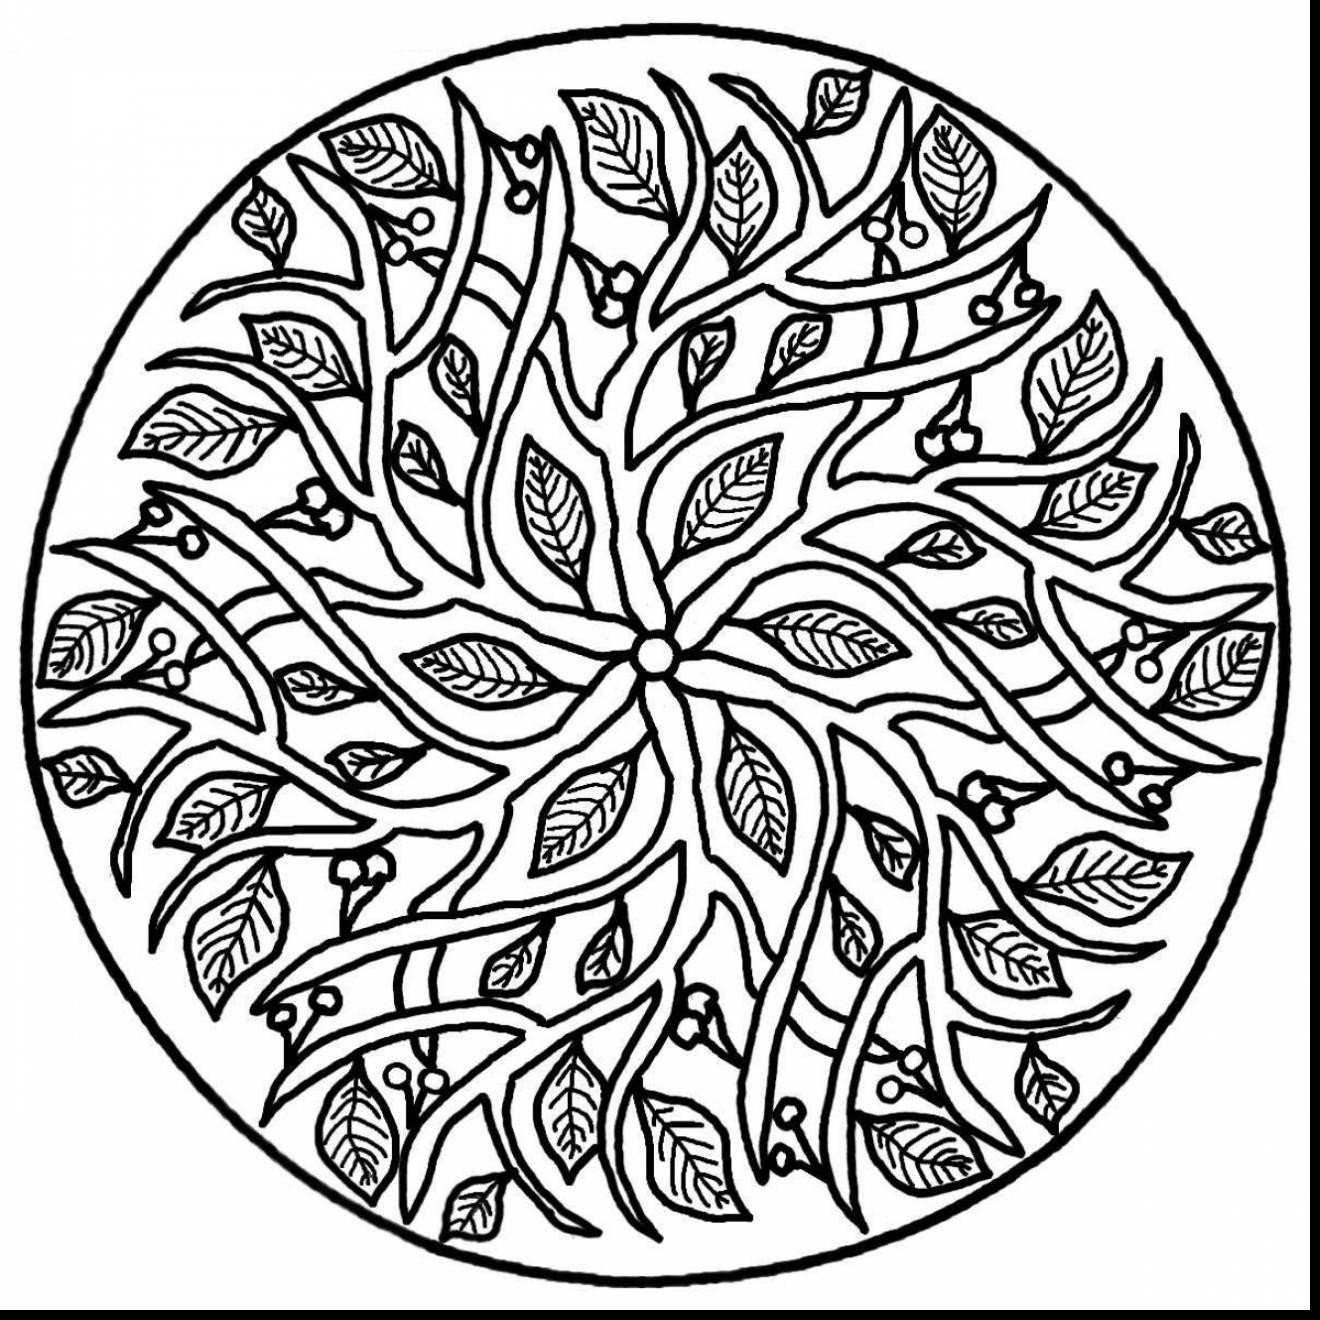 Road Trip Coloring Pages Easy Mandala Coloring Pages Elegant 25 Best Road Trip Pinterest For